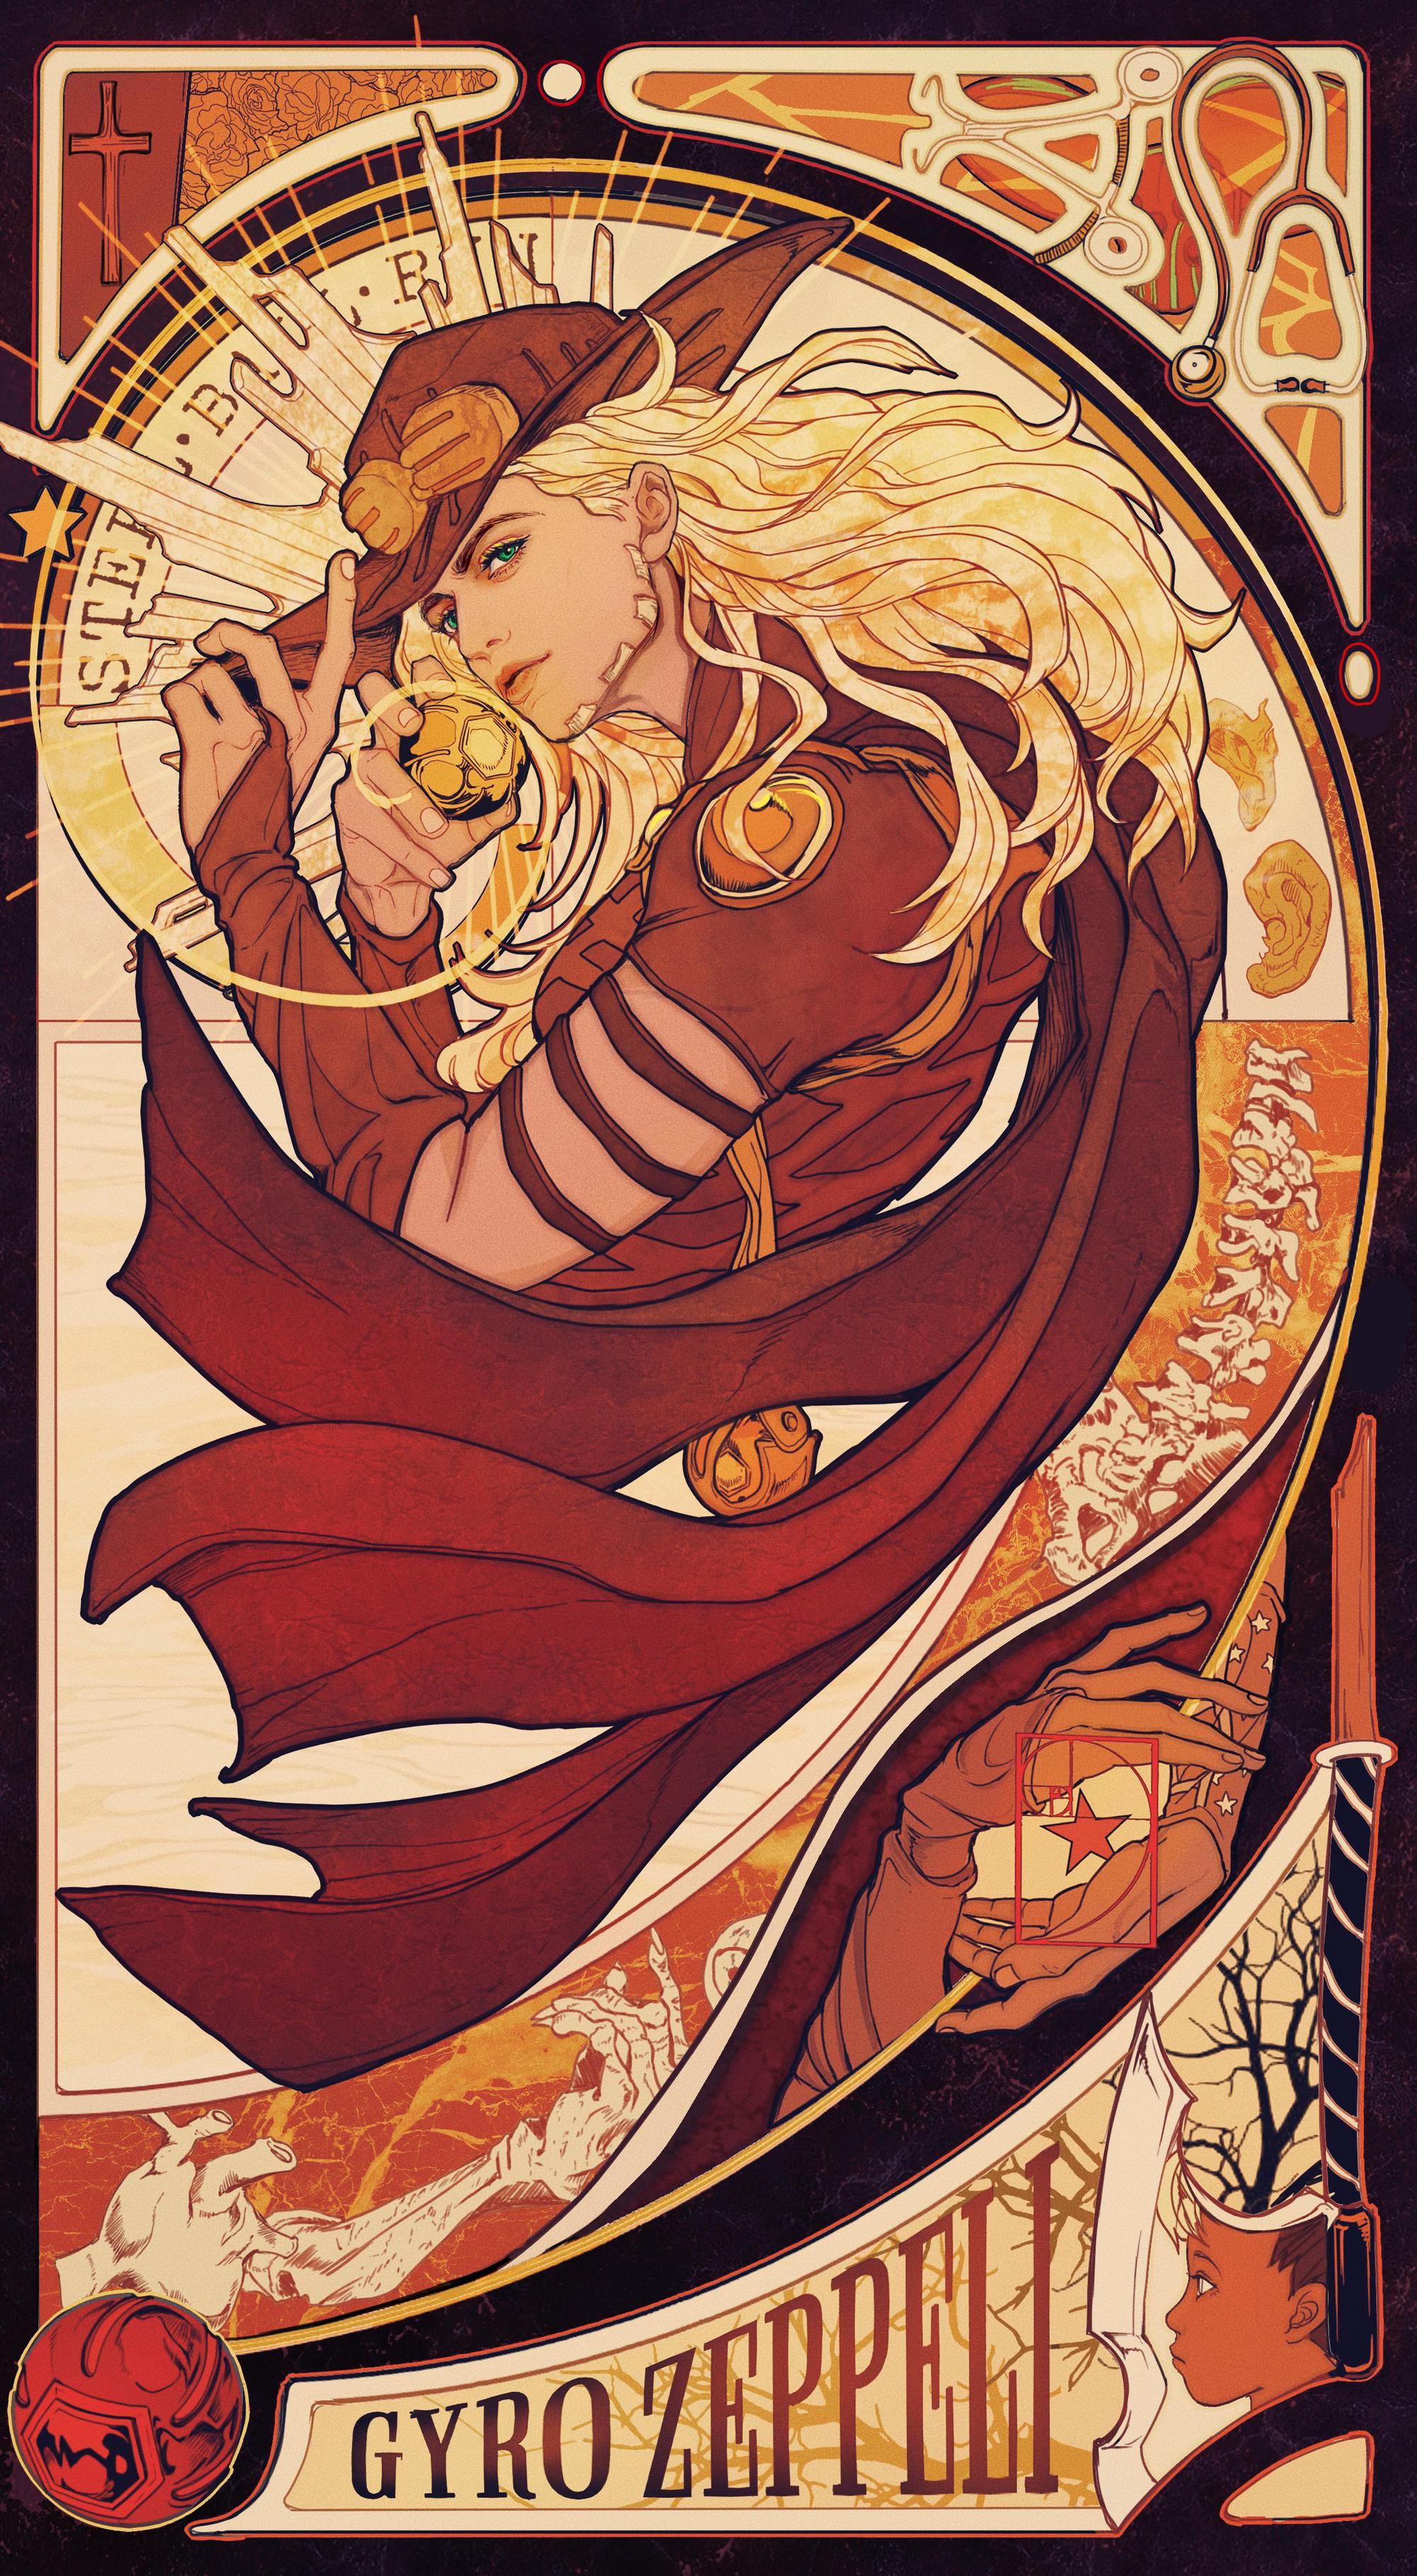 Collection of artwork from Steel Ball Run